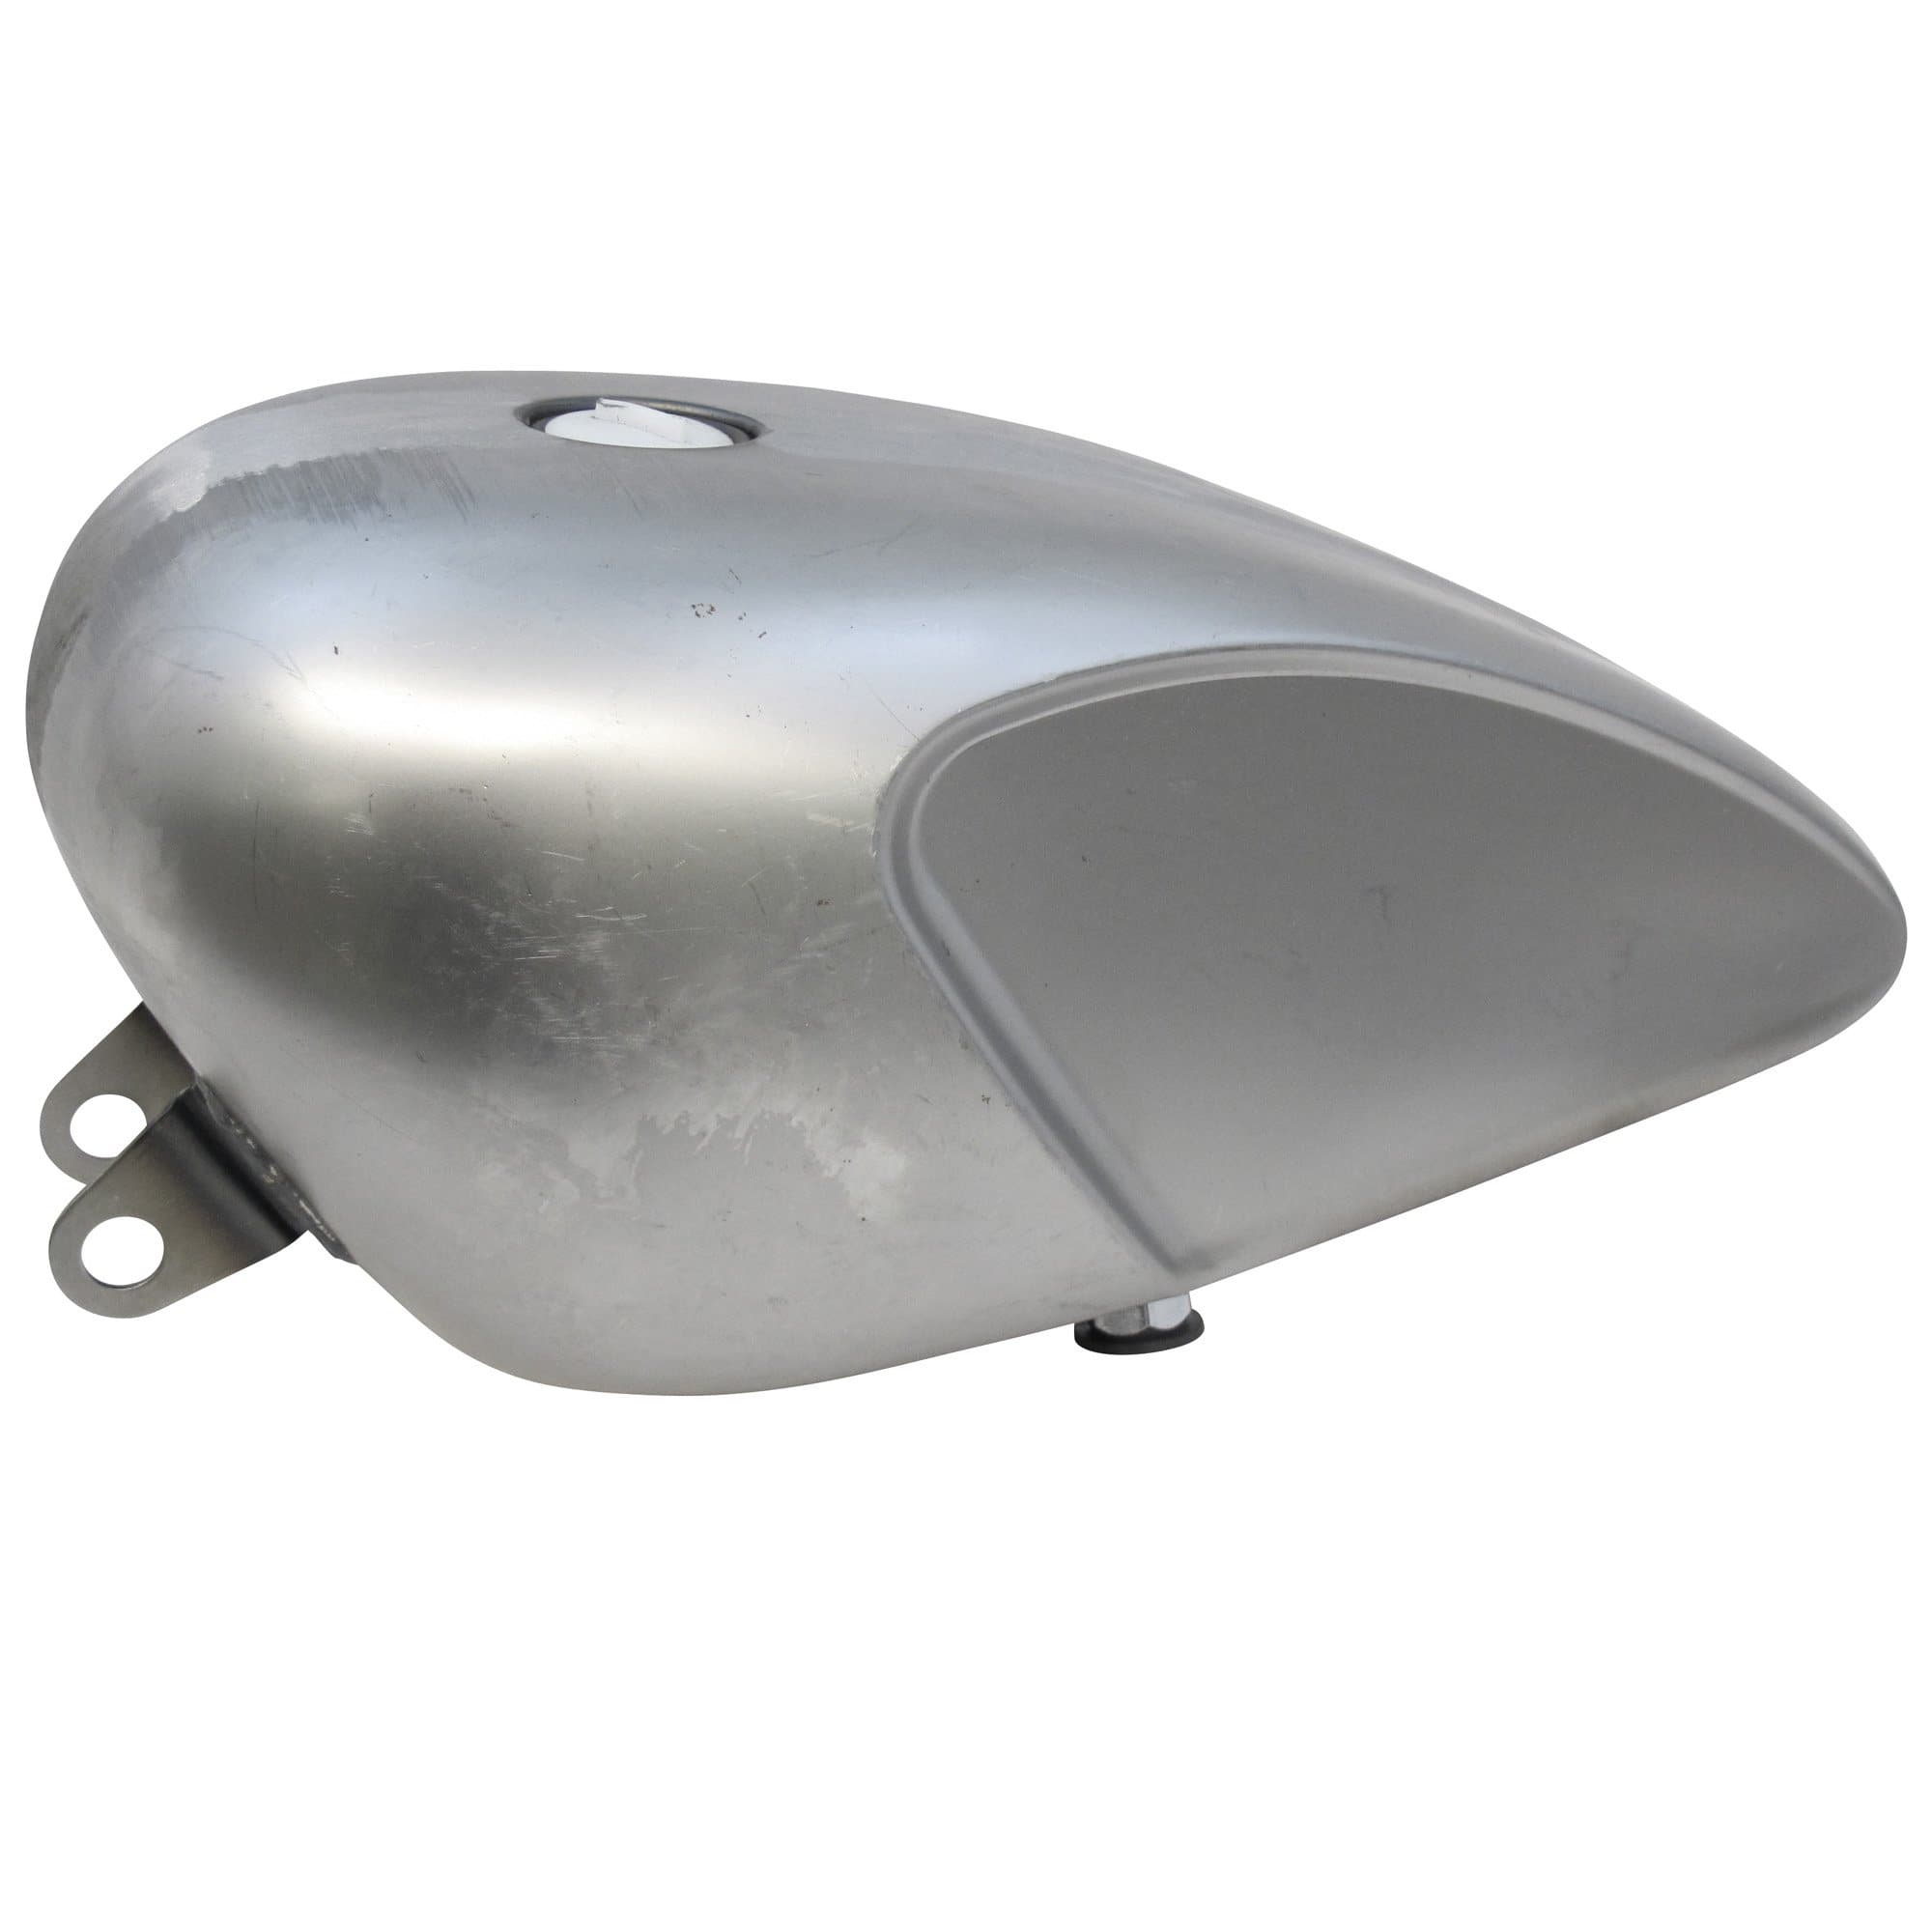 Sportster Fuel Tank Service Cover